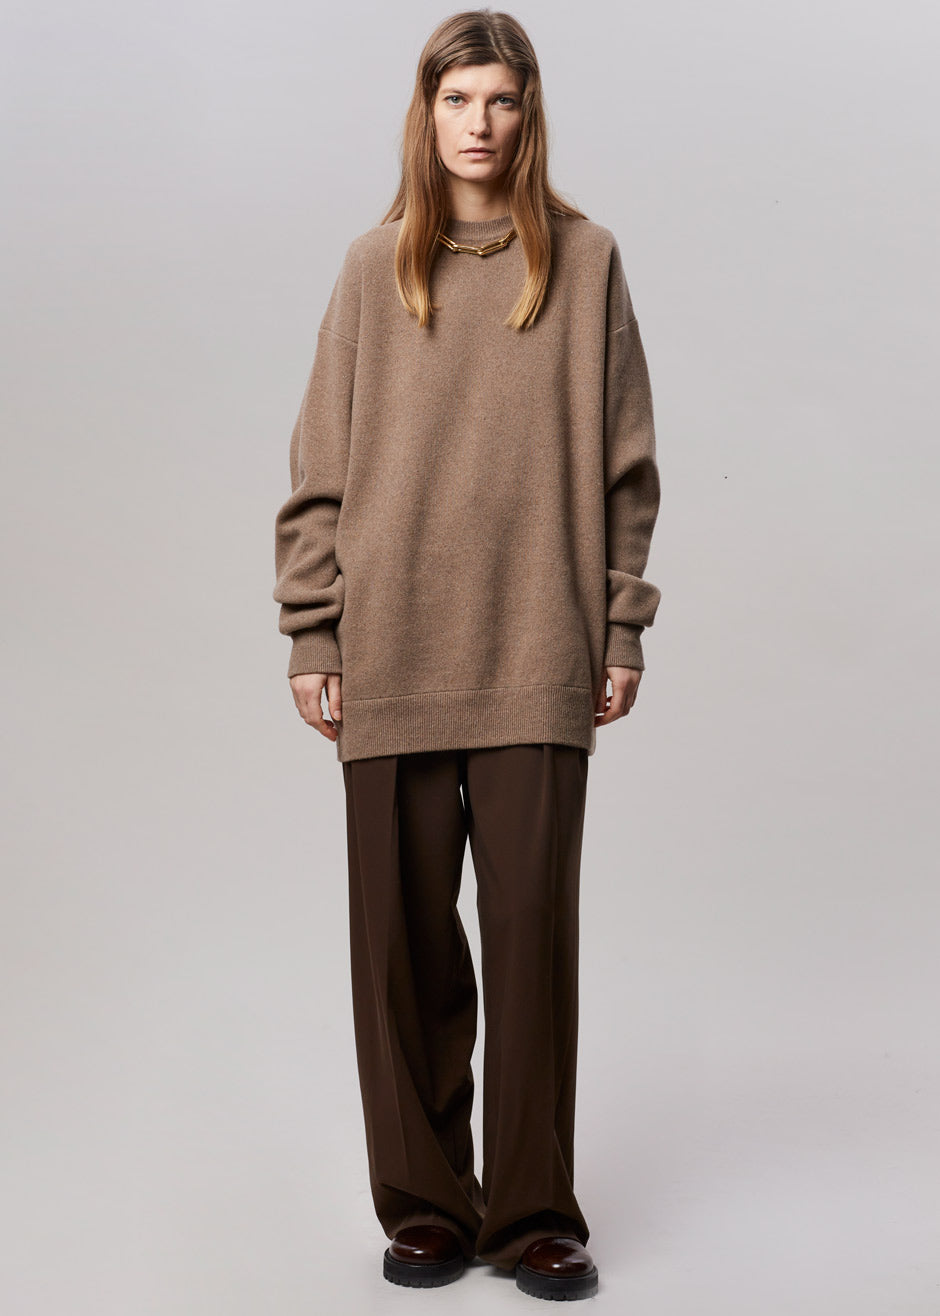 Hadrien Italian Recycled Cashmere Sweater - Taupe - 8